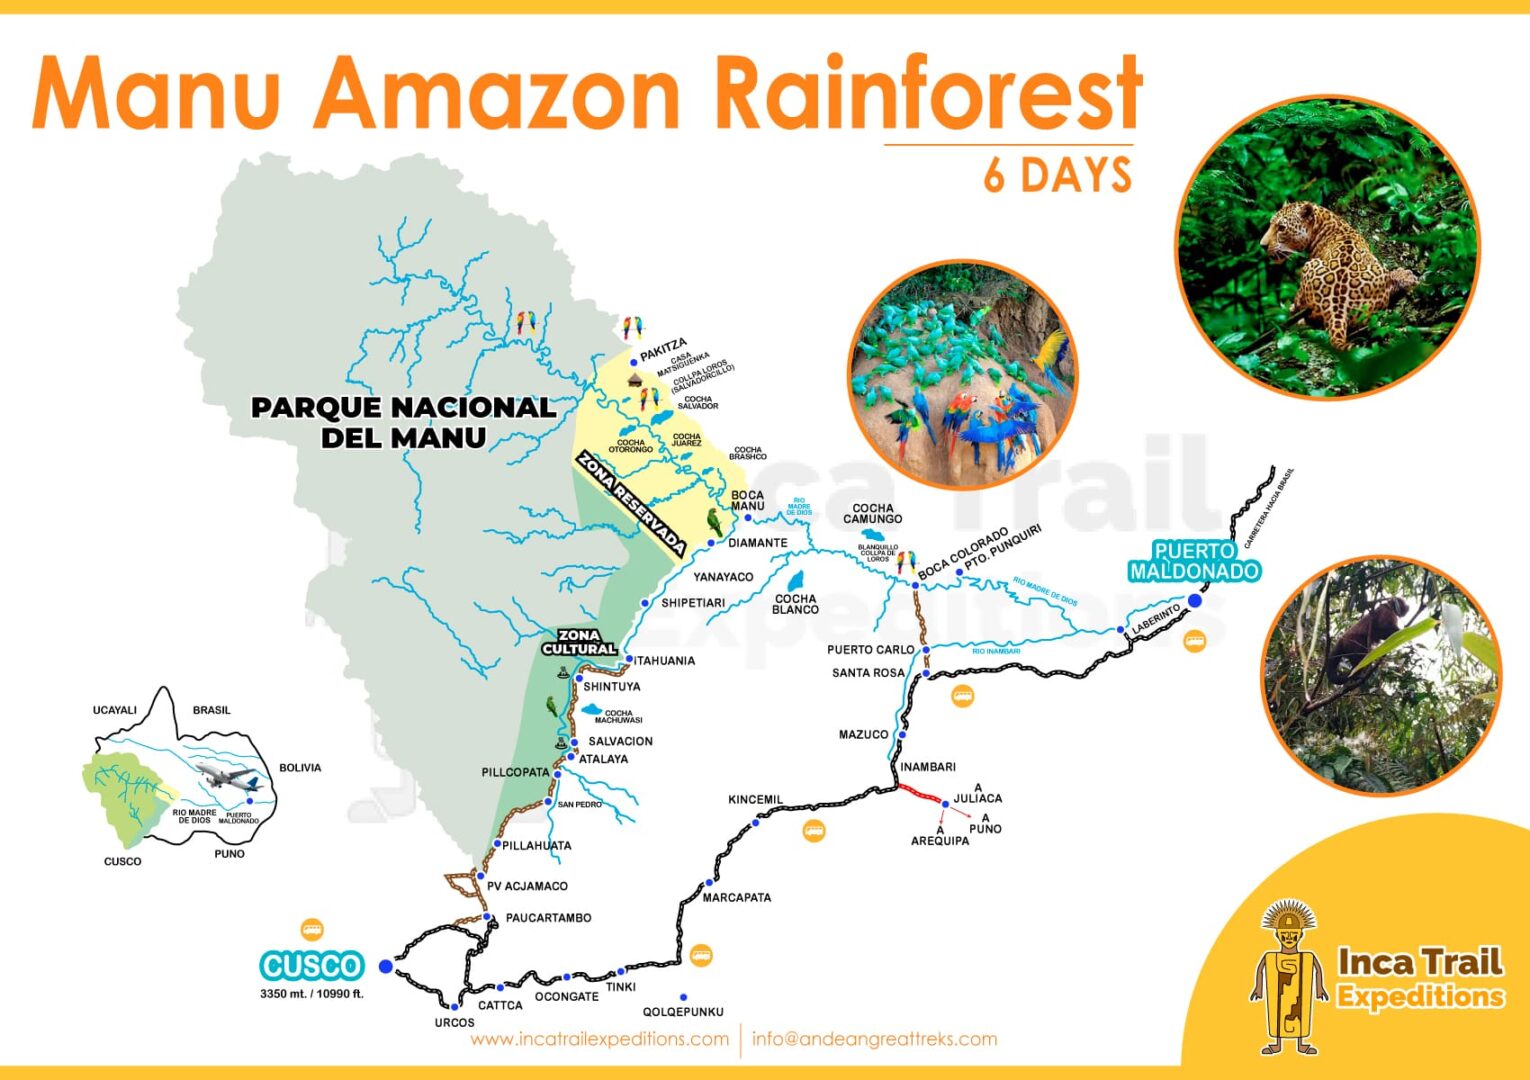 MANU-AMAZON-RAINFOREST-6-DAYS-BY-INCA-TRAIL-EXPEDITIONS